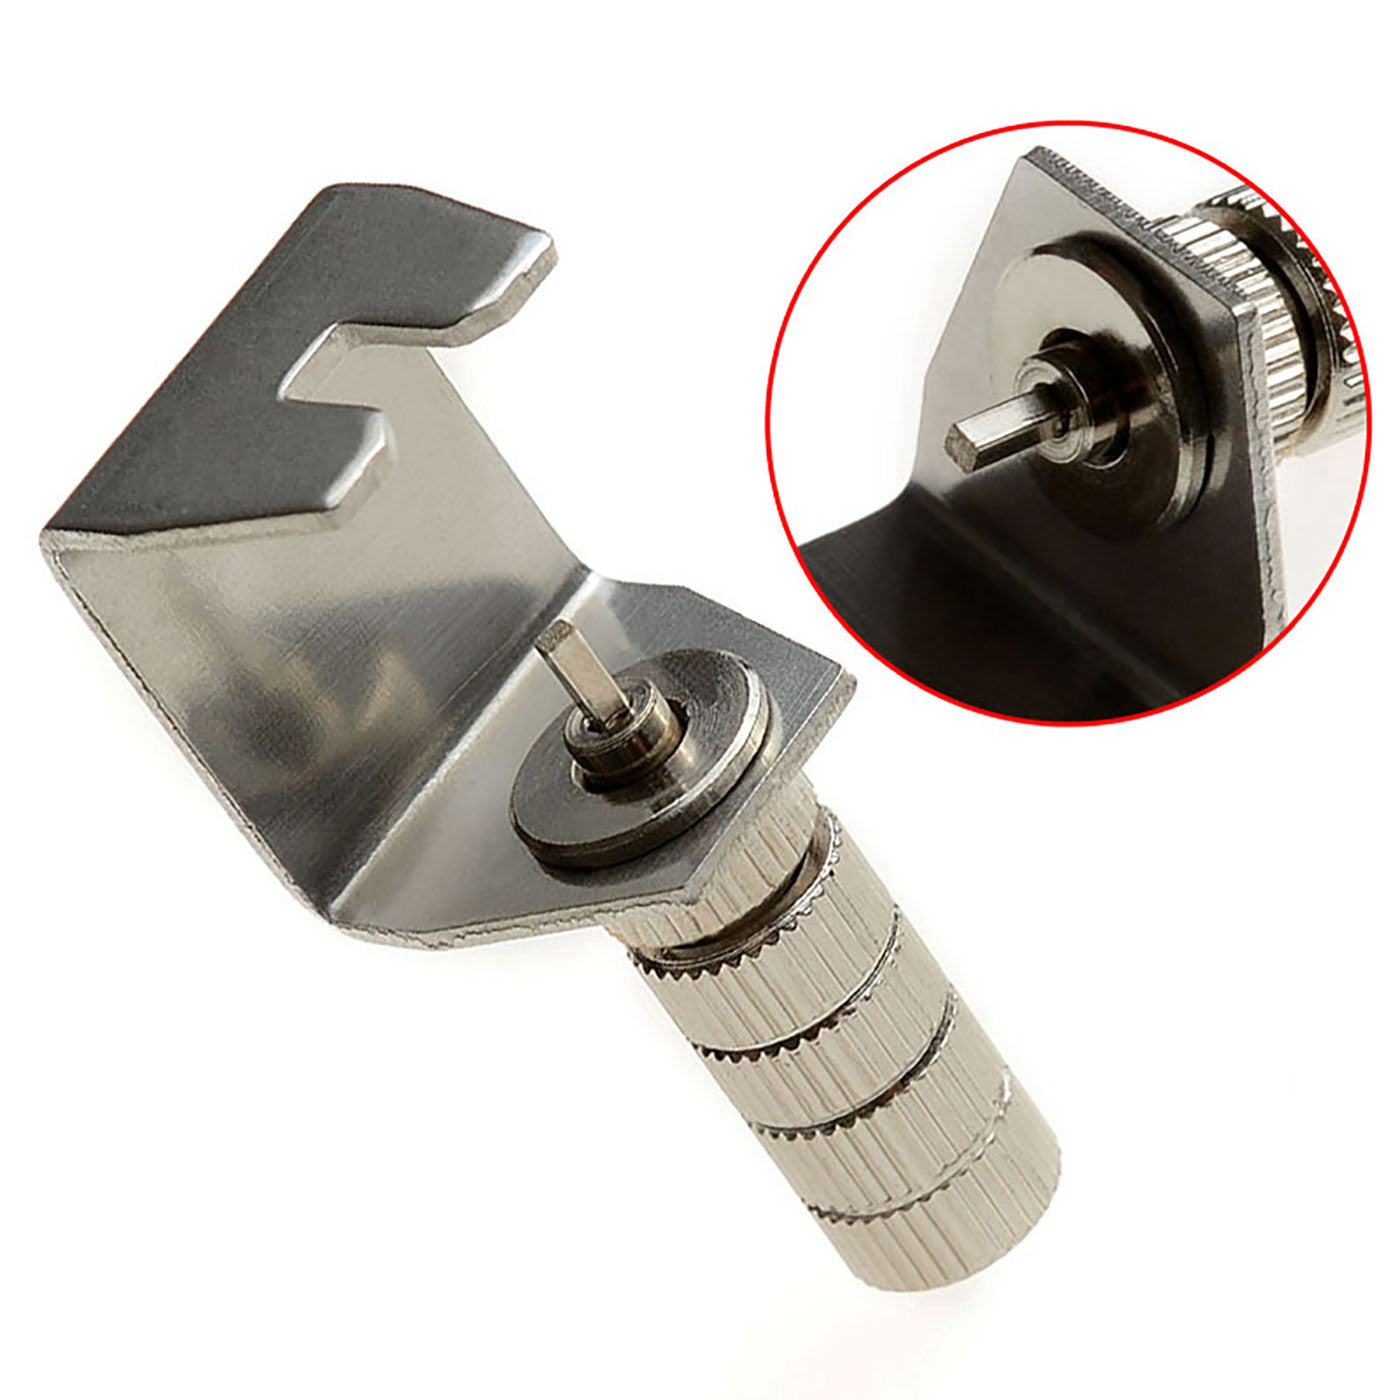 Dental Wrench Key for High Speed Handpiece Burs Changing - azdentall.com